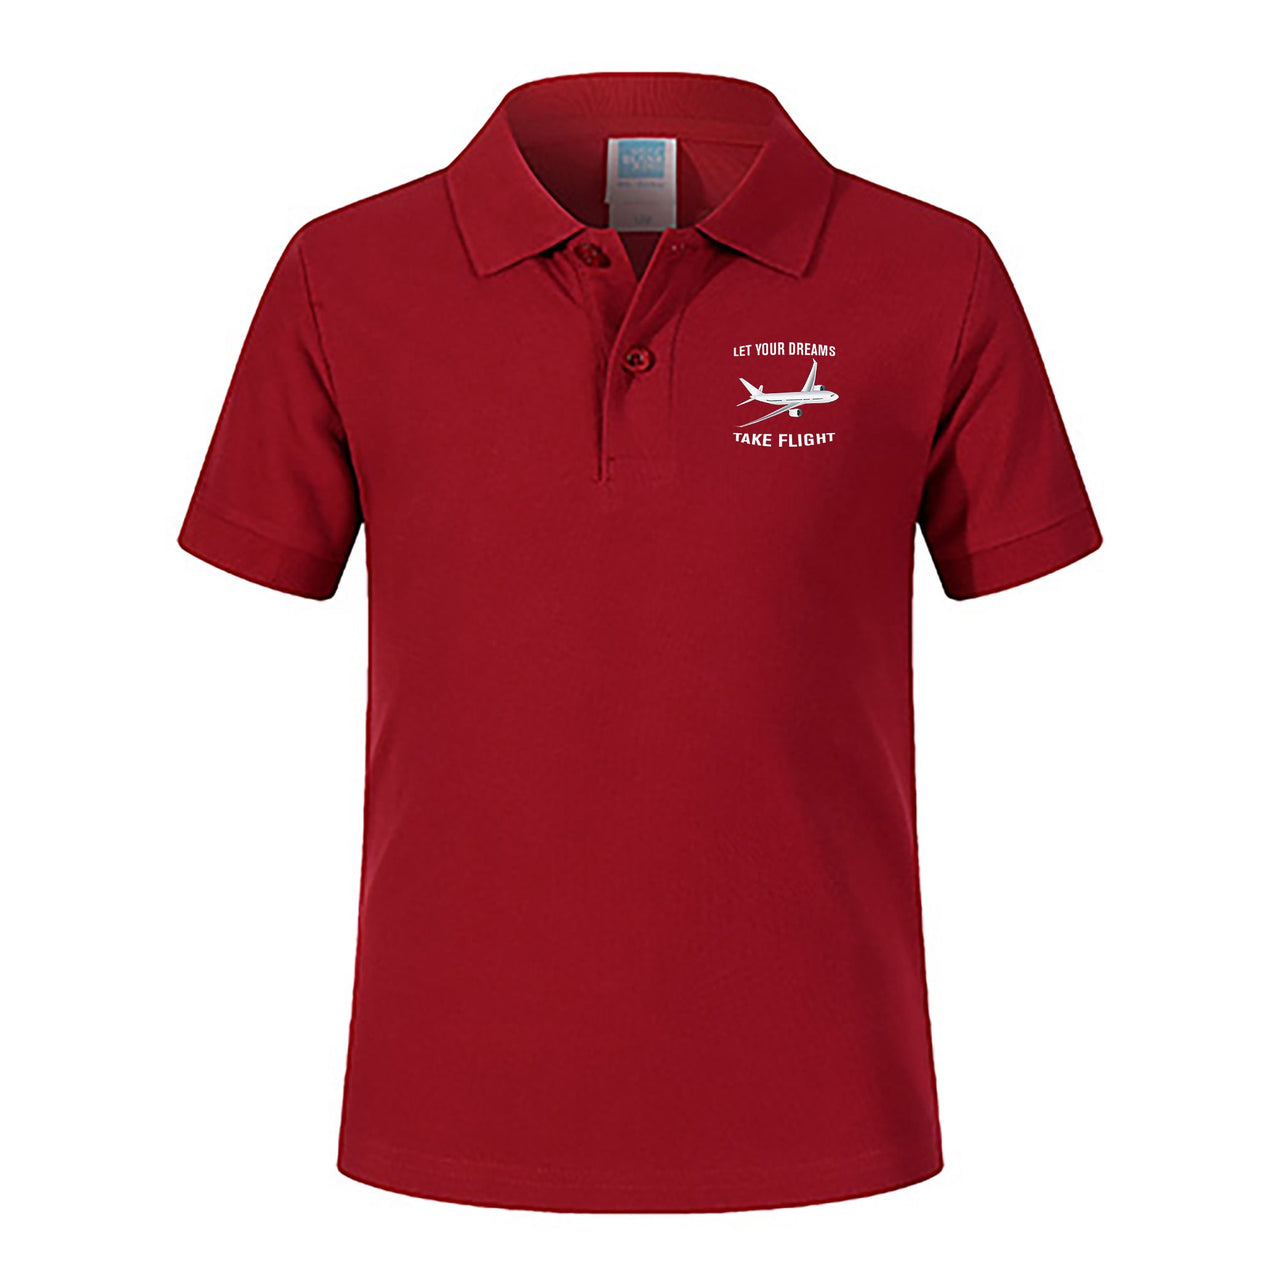 Let Your Dreams Take Flight Designed Children Polo T-Shirts